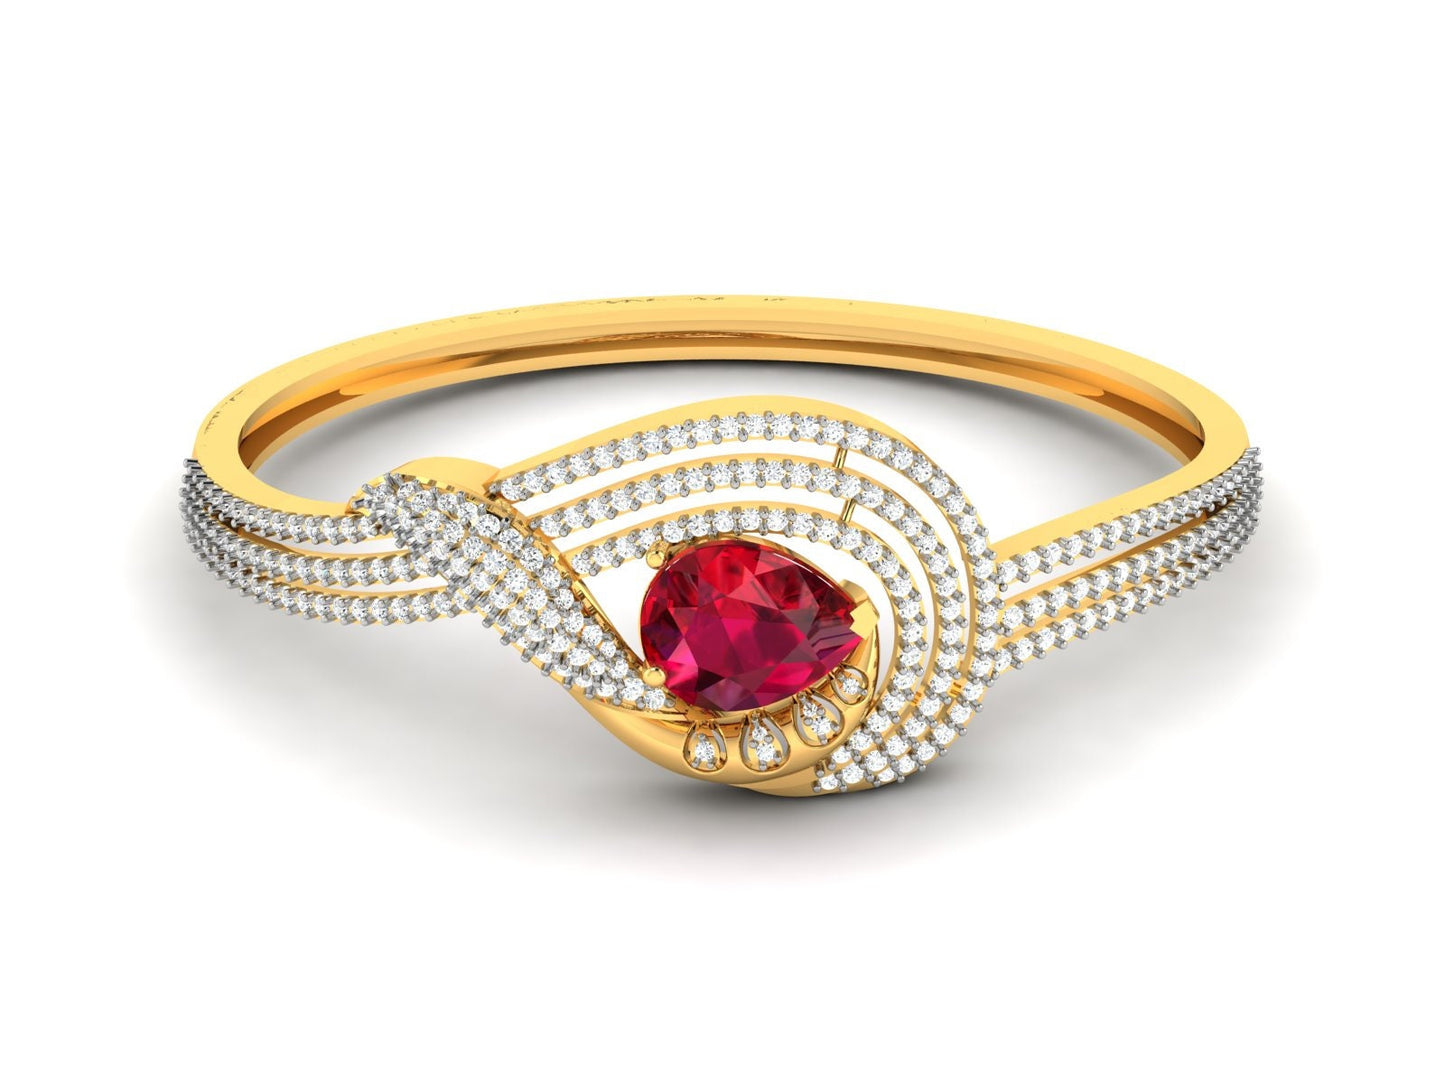 4.00 Ct Ruby And White Diamond Bangle Bracelet With 14k Yellow Gold Plated Silver, Ruby Bangles, Gift For Her, Handmade Bracelet, Gift